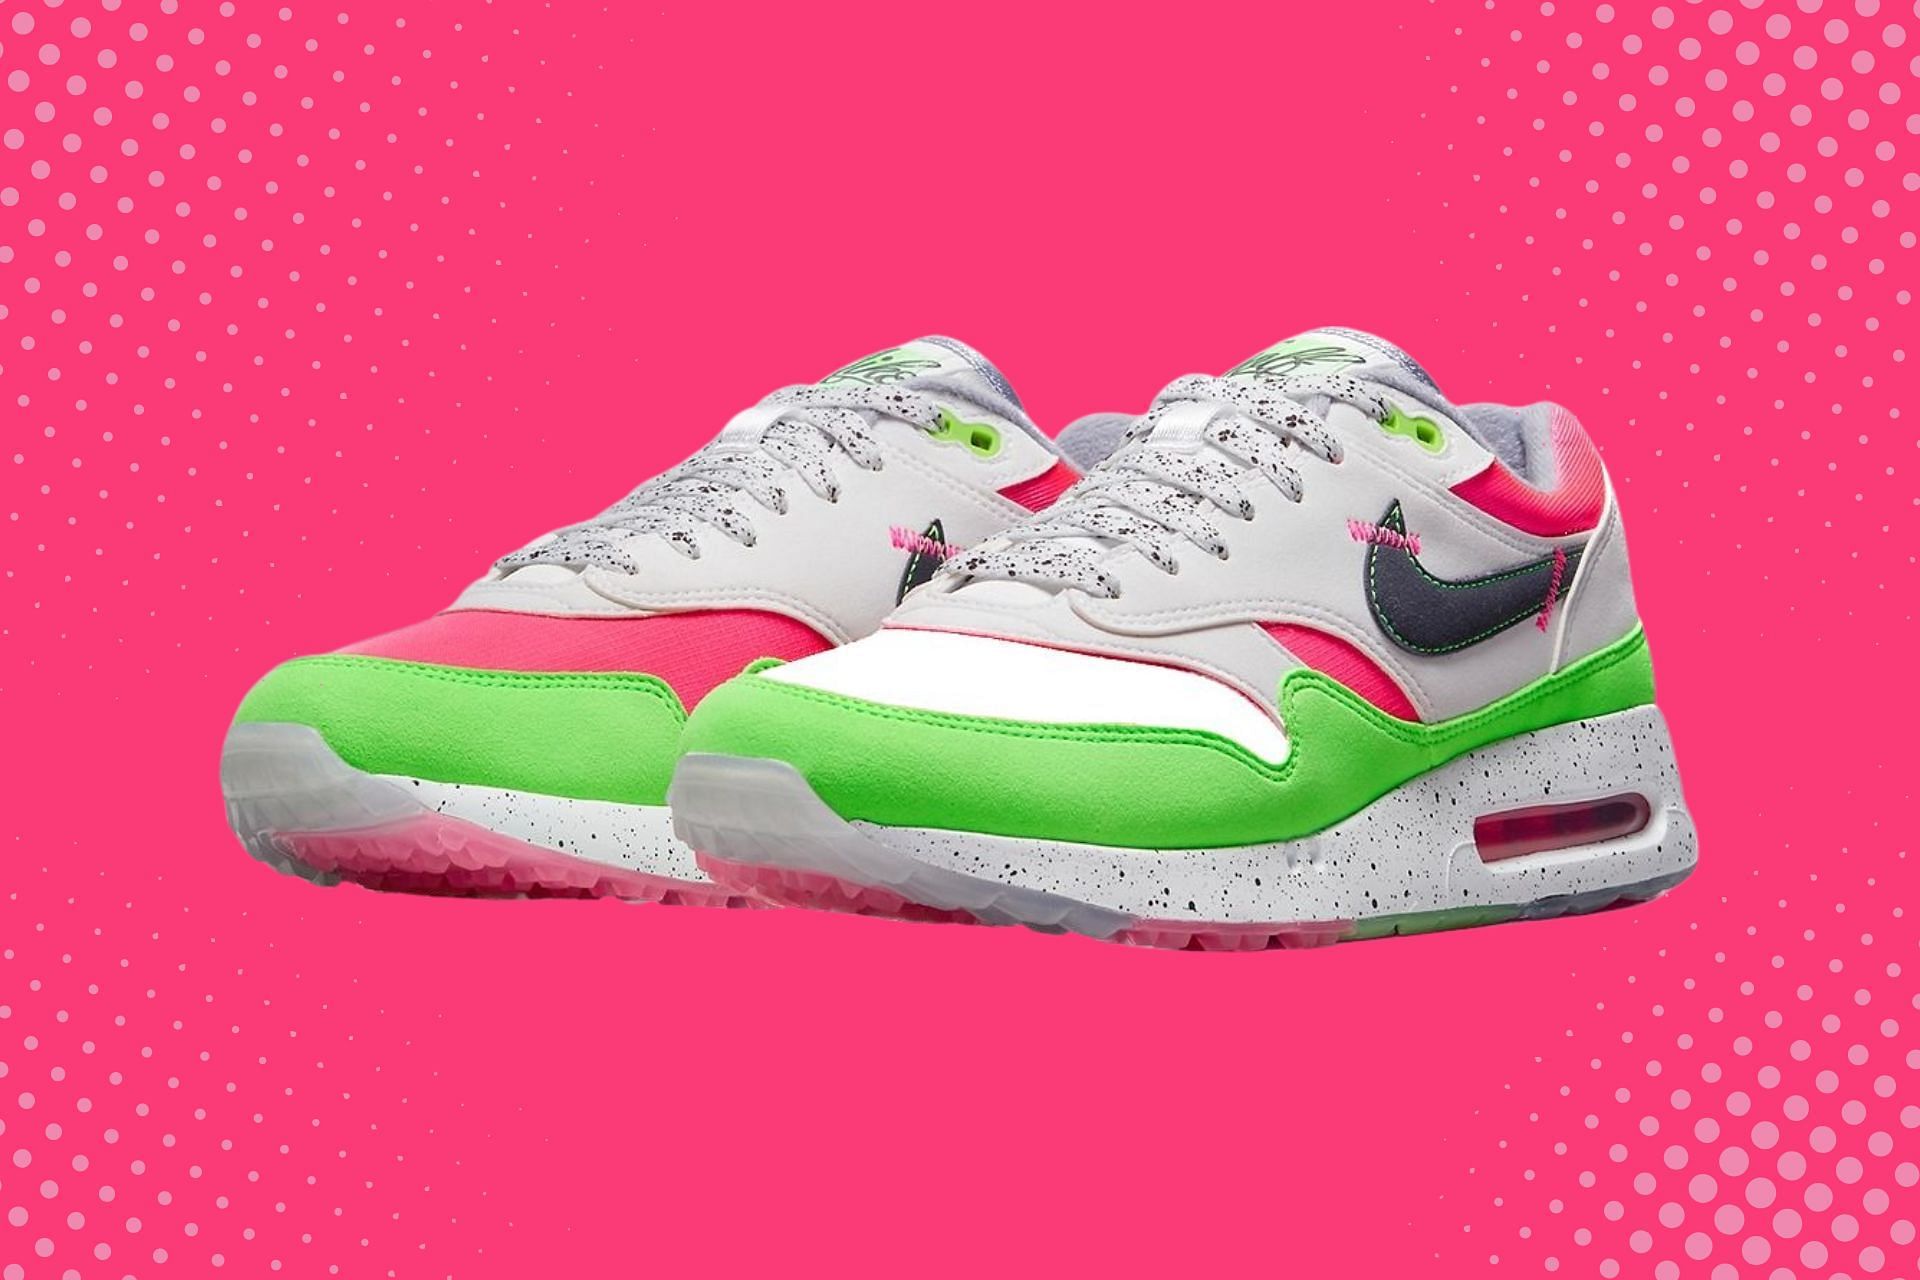 Nike Air Max 1 '86 OG Golf “Watermelon” shoes: to price, and more details